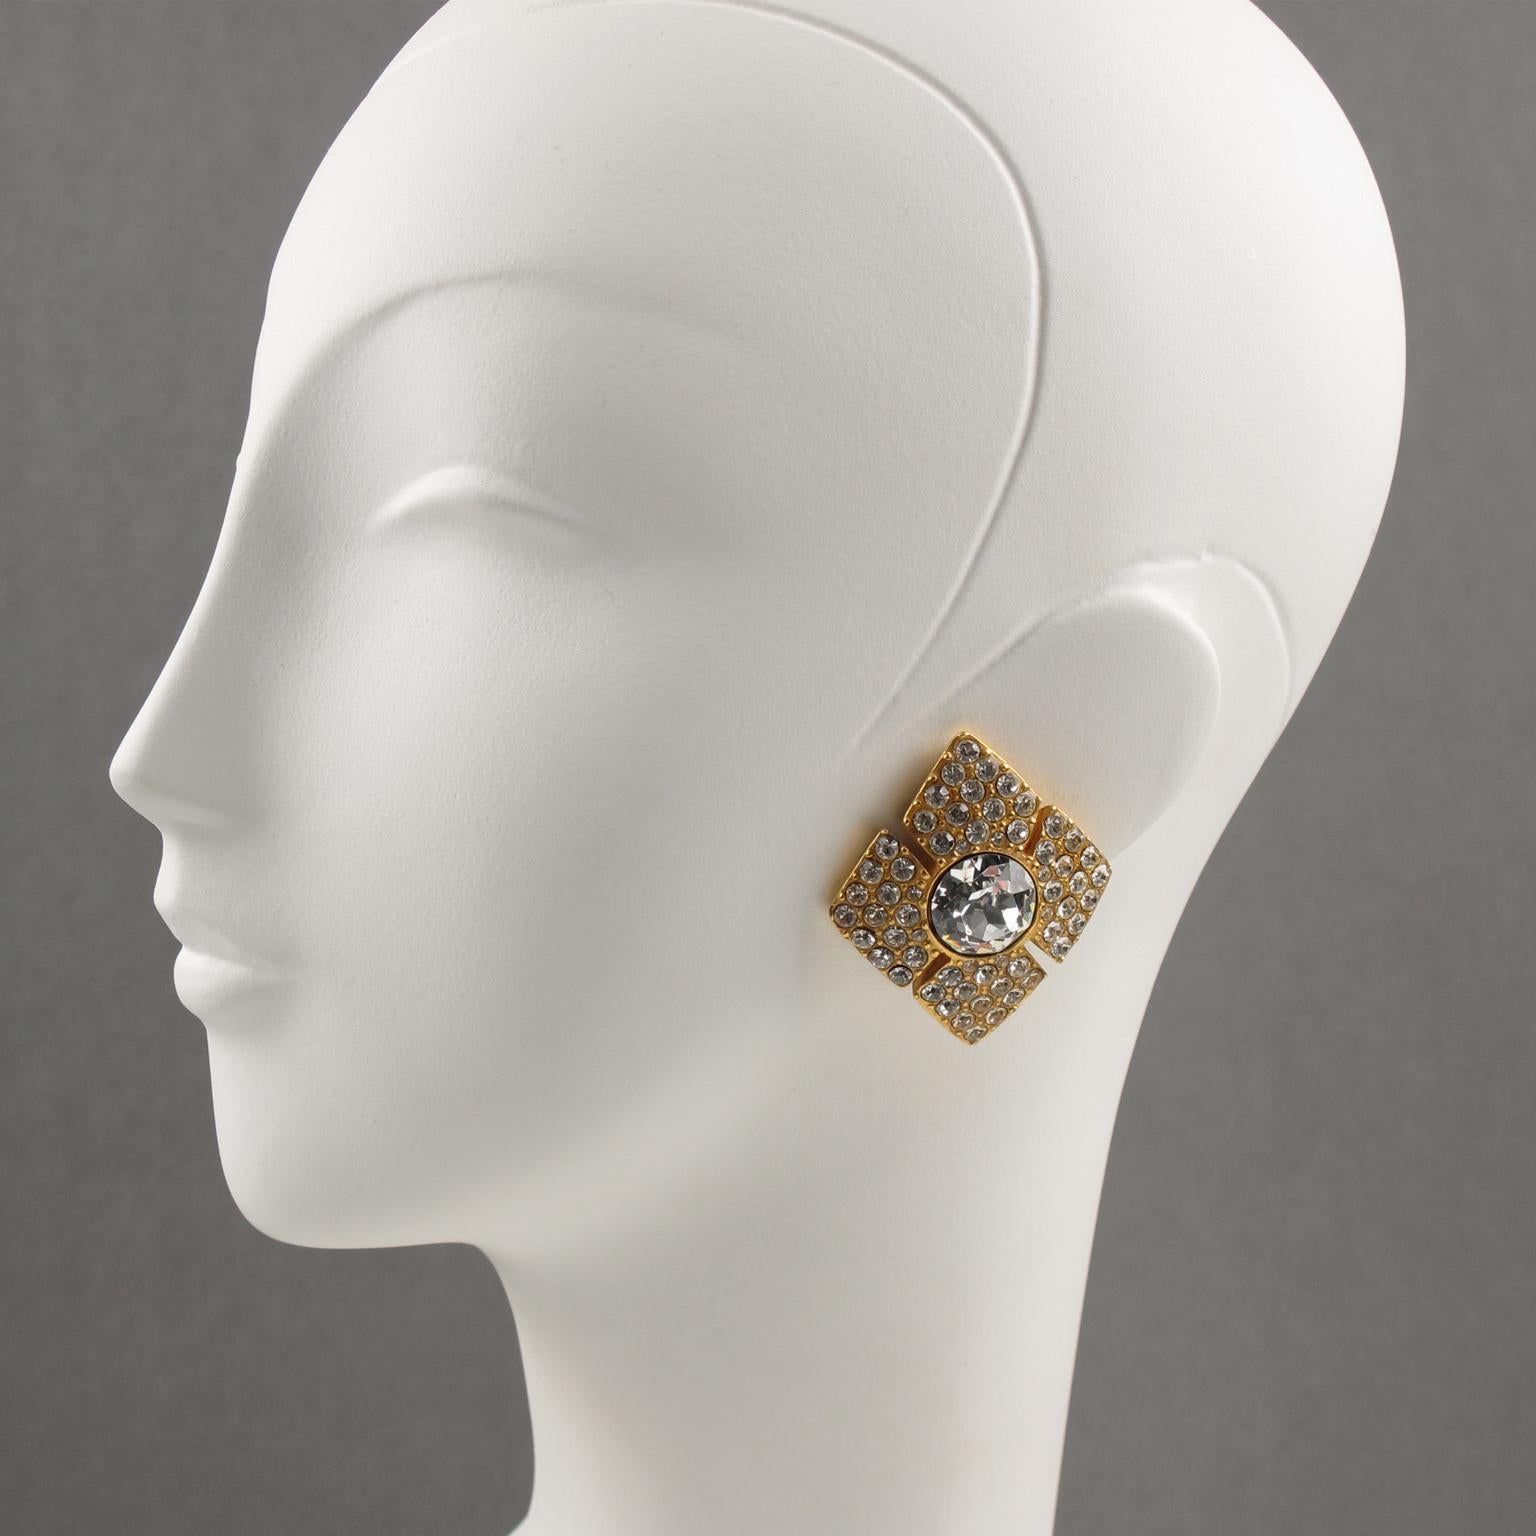 These elegant Christian Dior Paris clip-on earrings boast a diamond-shaped design, all paved with tiny crystal rhinestones and topped in the center with a larger faceted crystal rhinestone. The earrings are marked underside with the Christian Dior